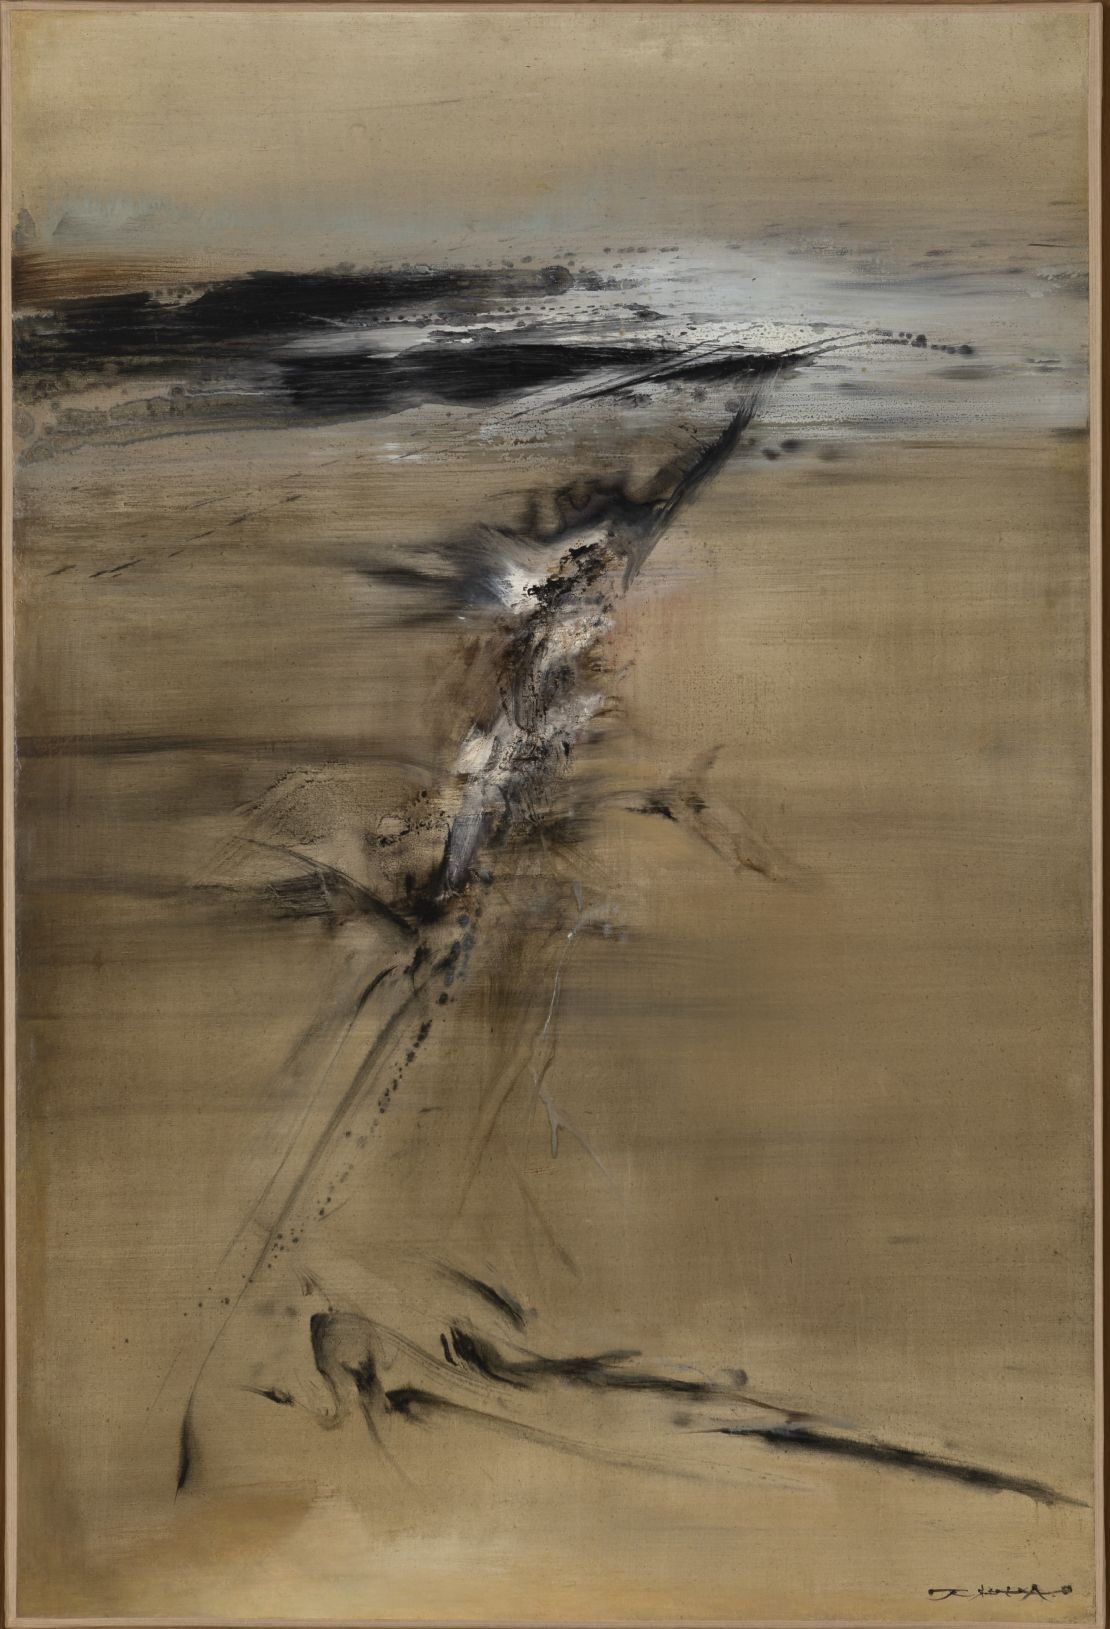 "10 05 62," a painting from Zao Wou-Ki's so-called "hurricane" period.